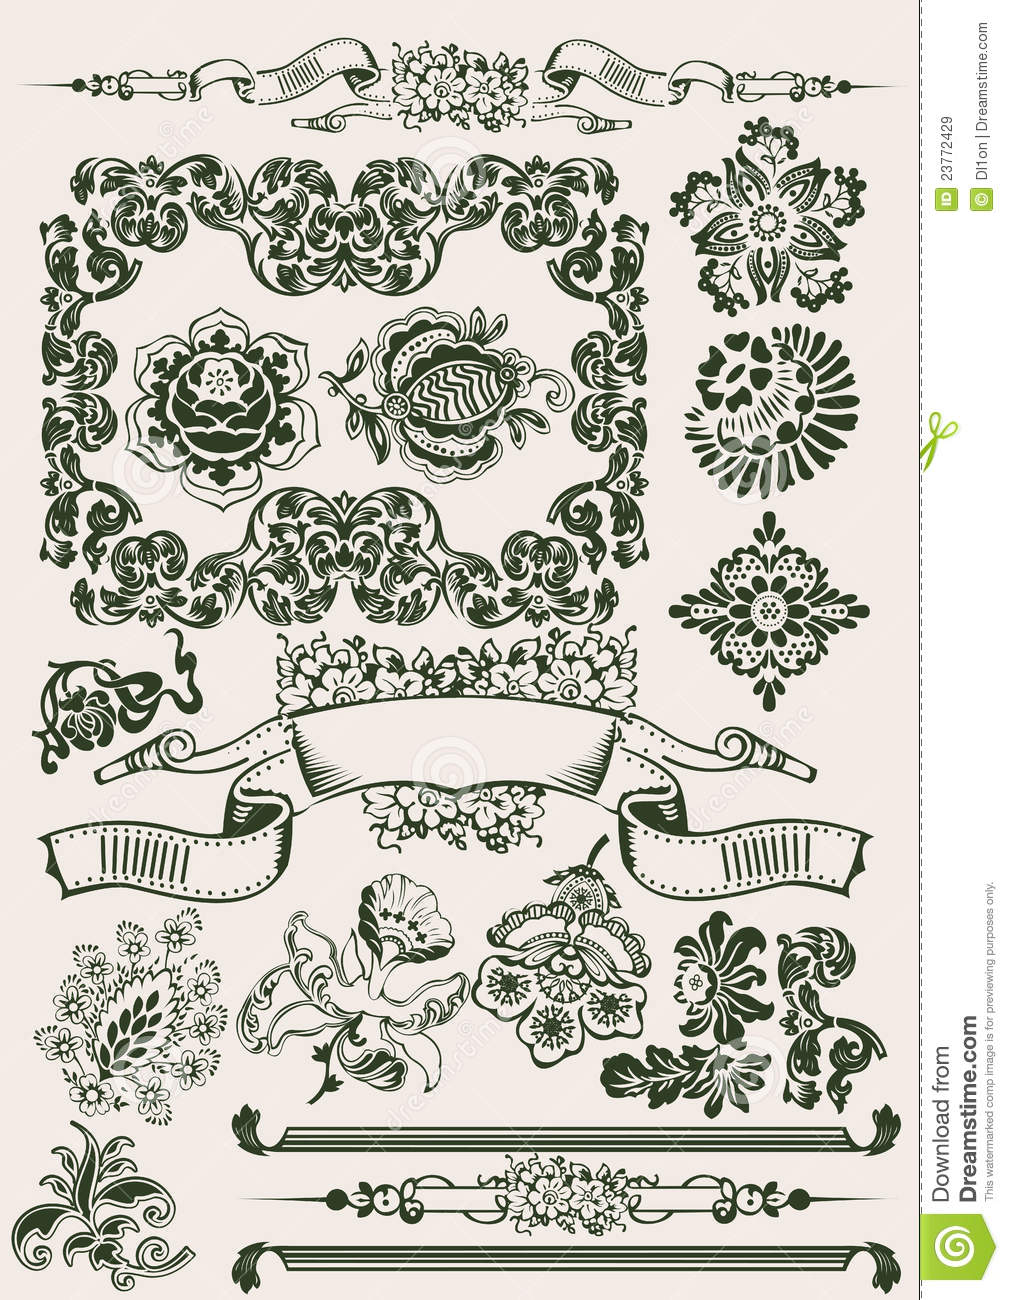 One Color Flowers Vintage Clipart Royalty Free Stock Images   Image